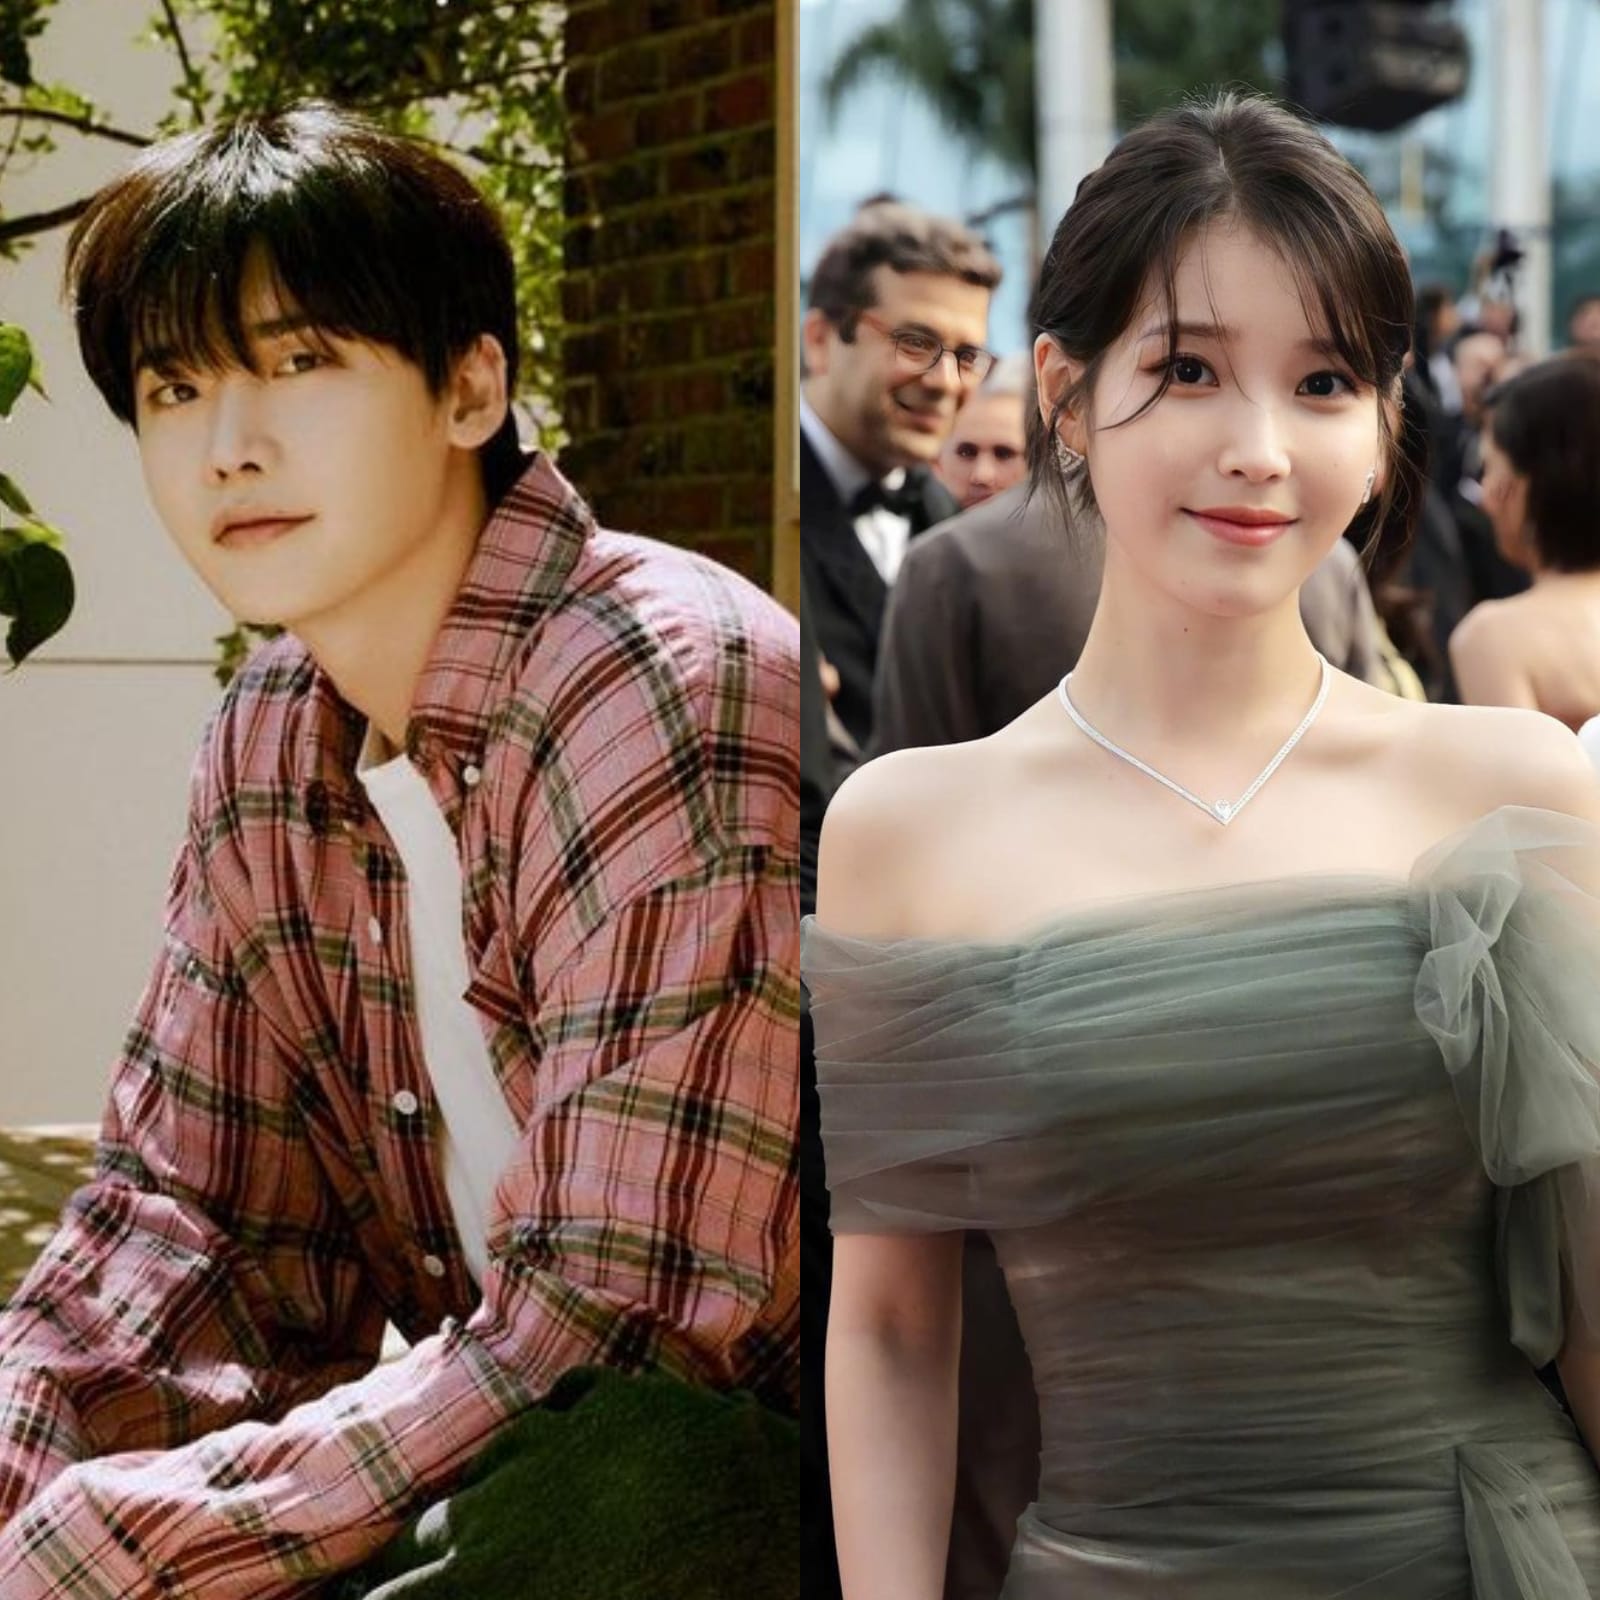 Lee Jong-suk, IU Apologise for Surprise Dating News; Singer Says 'I Feel  Cautious About This But...'